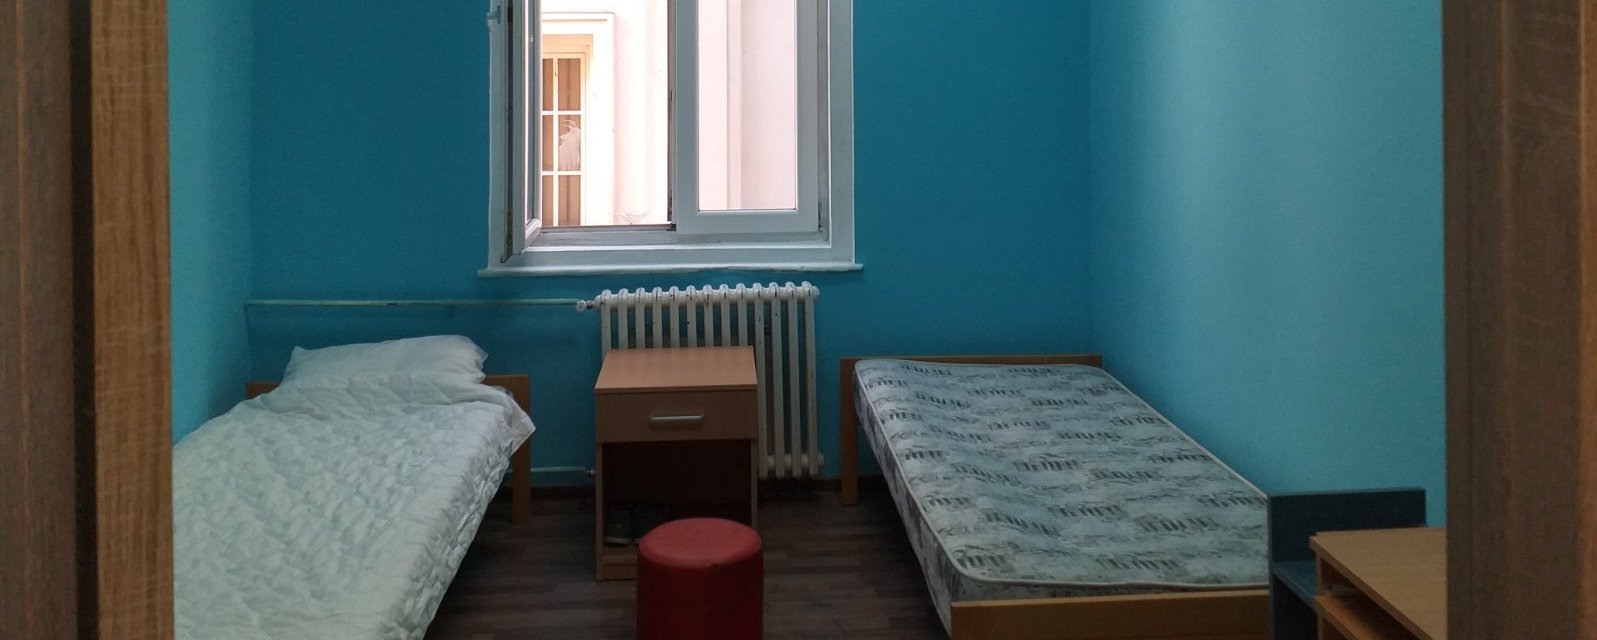 Renovation and furnishing of a children’s home in Serbia